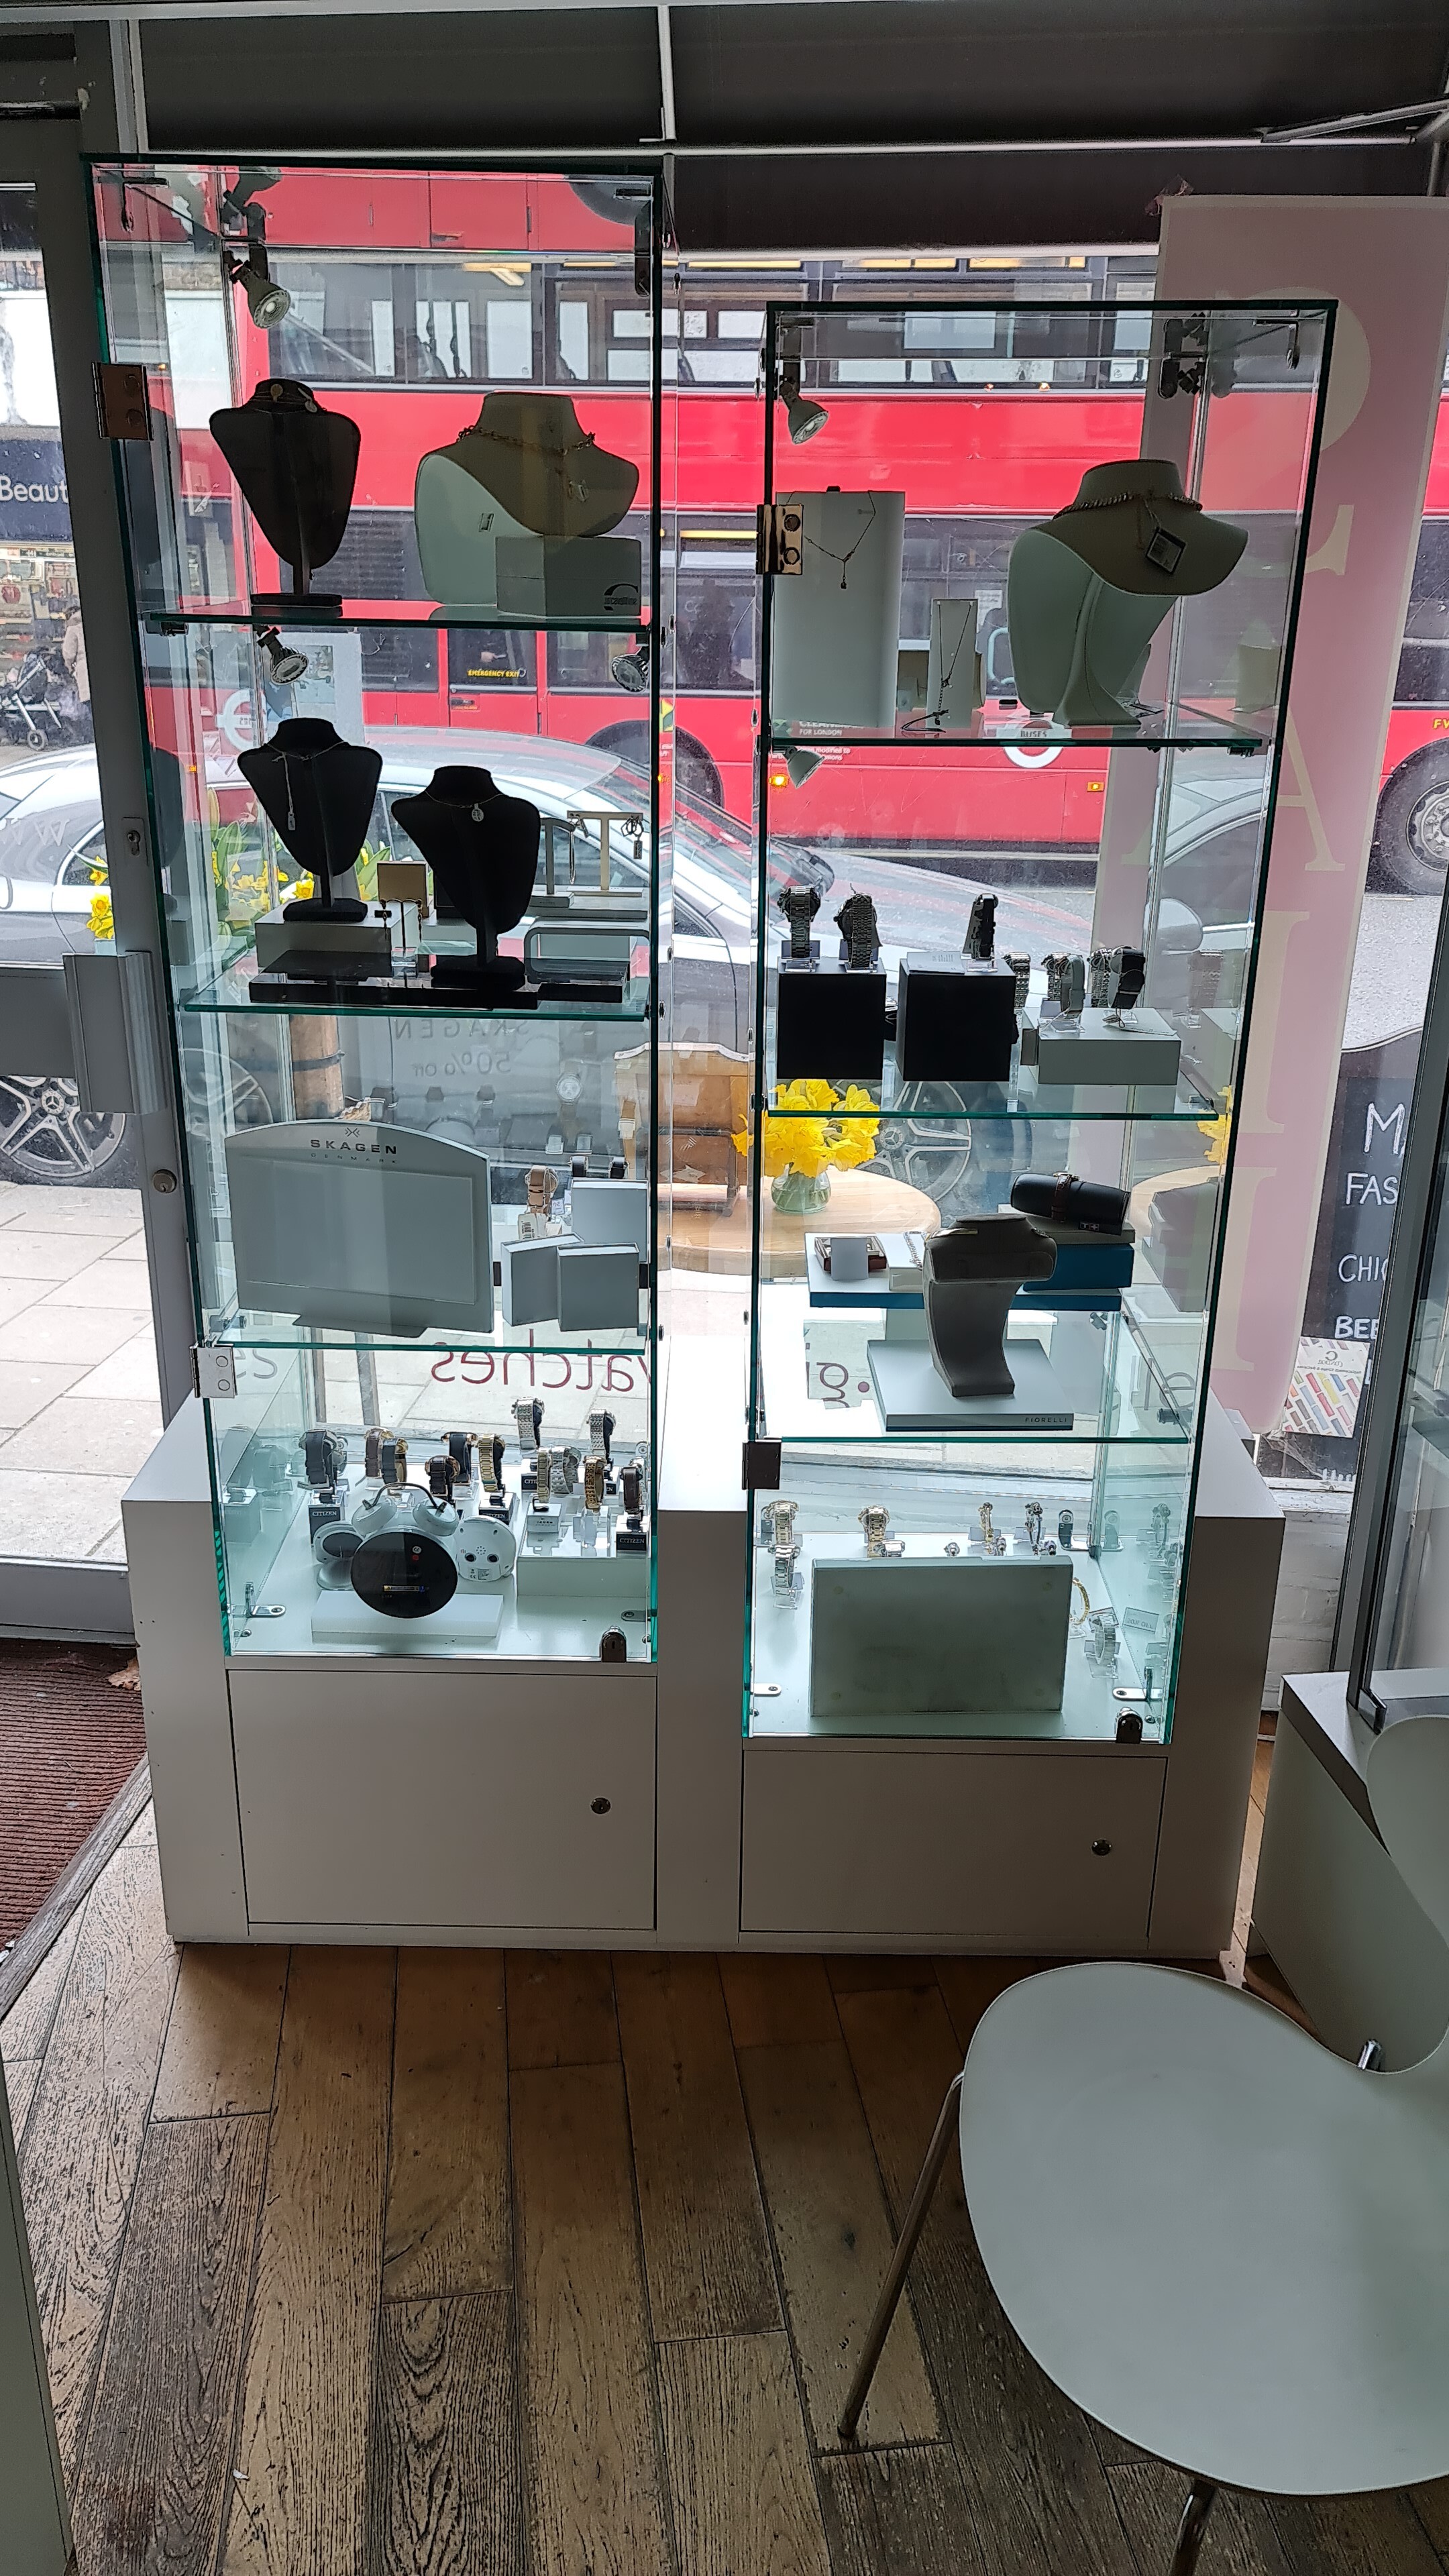 A shop display unit with two glazed door sections with locks and internal glass shelves on storage